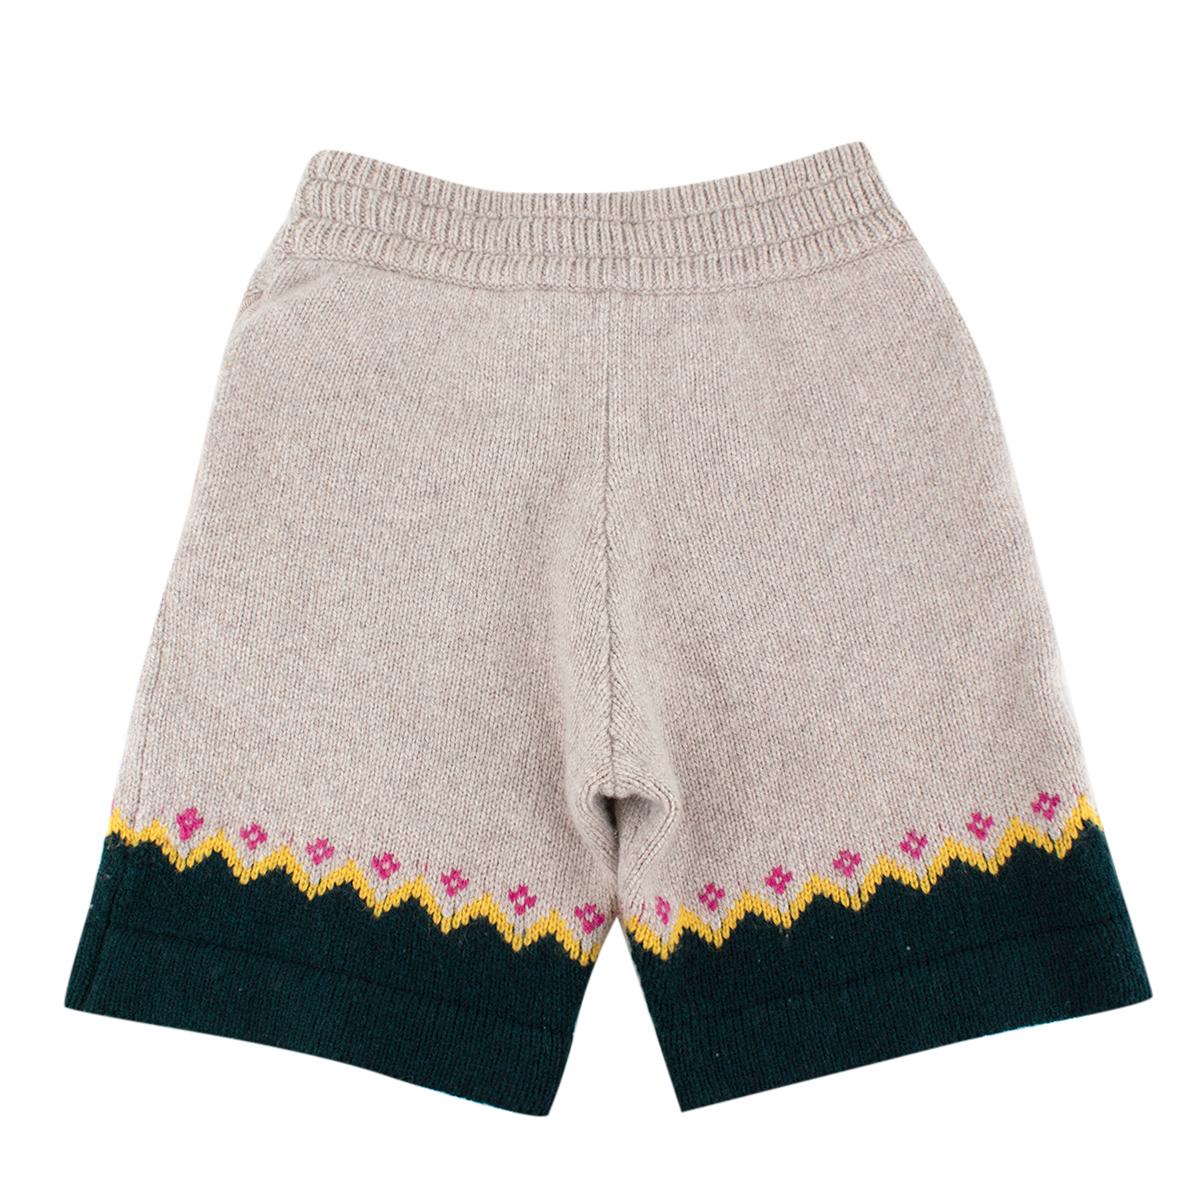 Burberry Gunley Fair-Isle wool shorts

- Heavy-weight Wool 
- Loose-fit 
- Thick Waist drawstring
- Forest-green hemline 
- Fair Isle Pattern 

Materials 
100% Wool 

Dry Clean Only 

Made in China 

Please note, these items are pre-owned and may